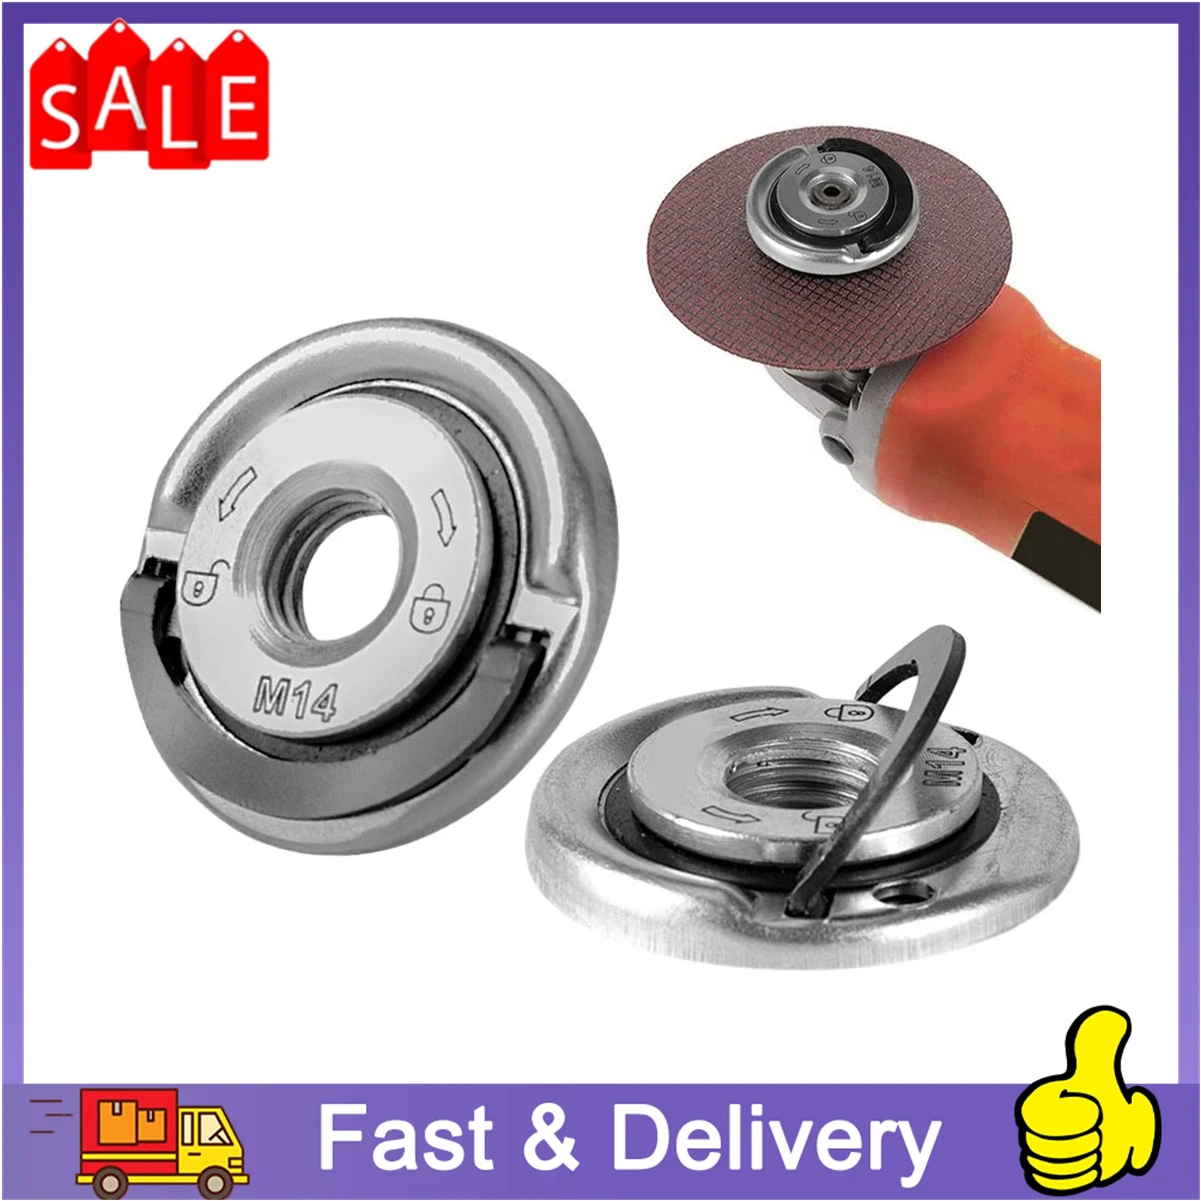 Quick Release Flange Nut M14 Thread Angle Grinder Release Locking Nut Pressing Plate For Angle Grinder Clamping Flange Accessory 2pcs quick release hex nut set hex nut set tools replacement for 100 type angle grinder modification accessories power tools